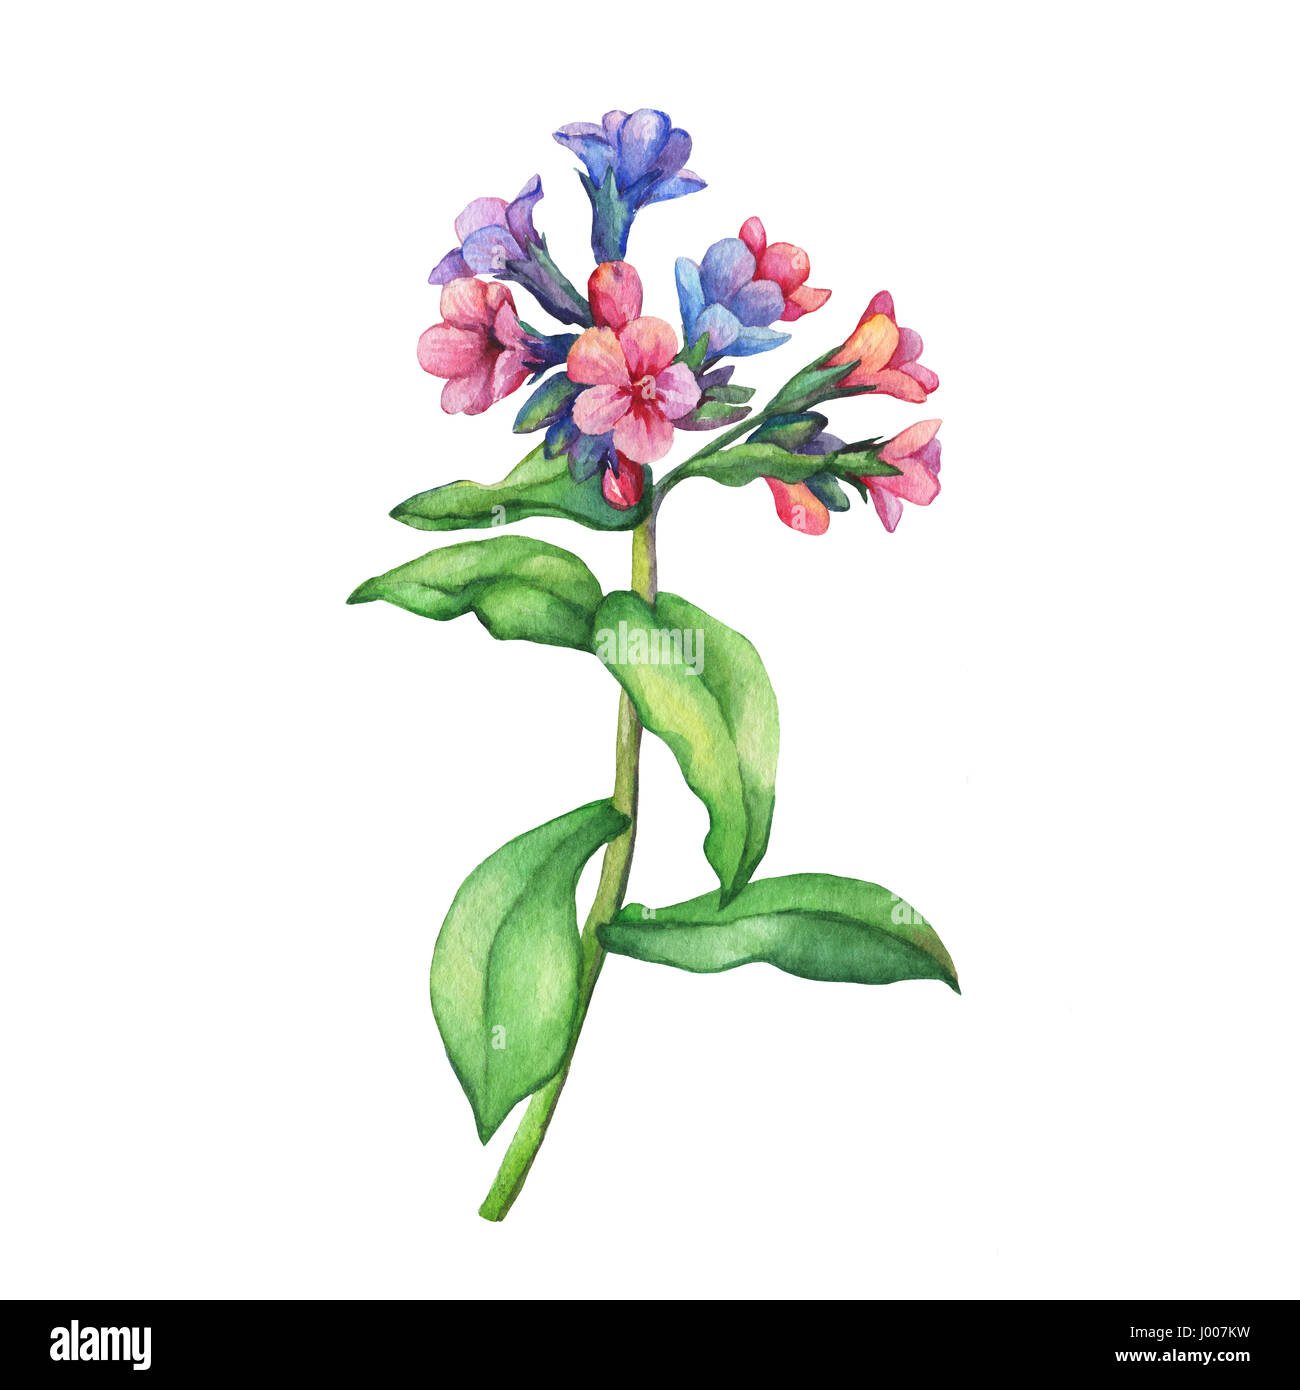 Illustration of first spring wild flowers - Dark lungwort medicinal (Pulmonaria officinalis). Hand drawn watercolor painting on white background. Stock Photo